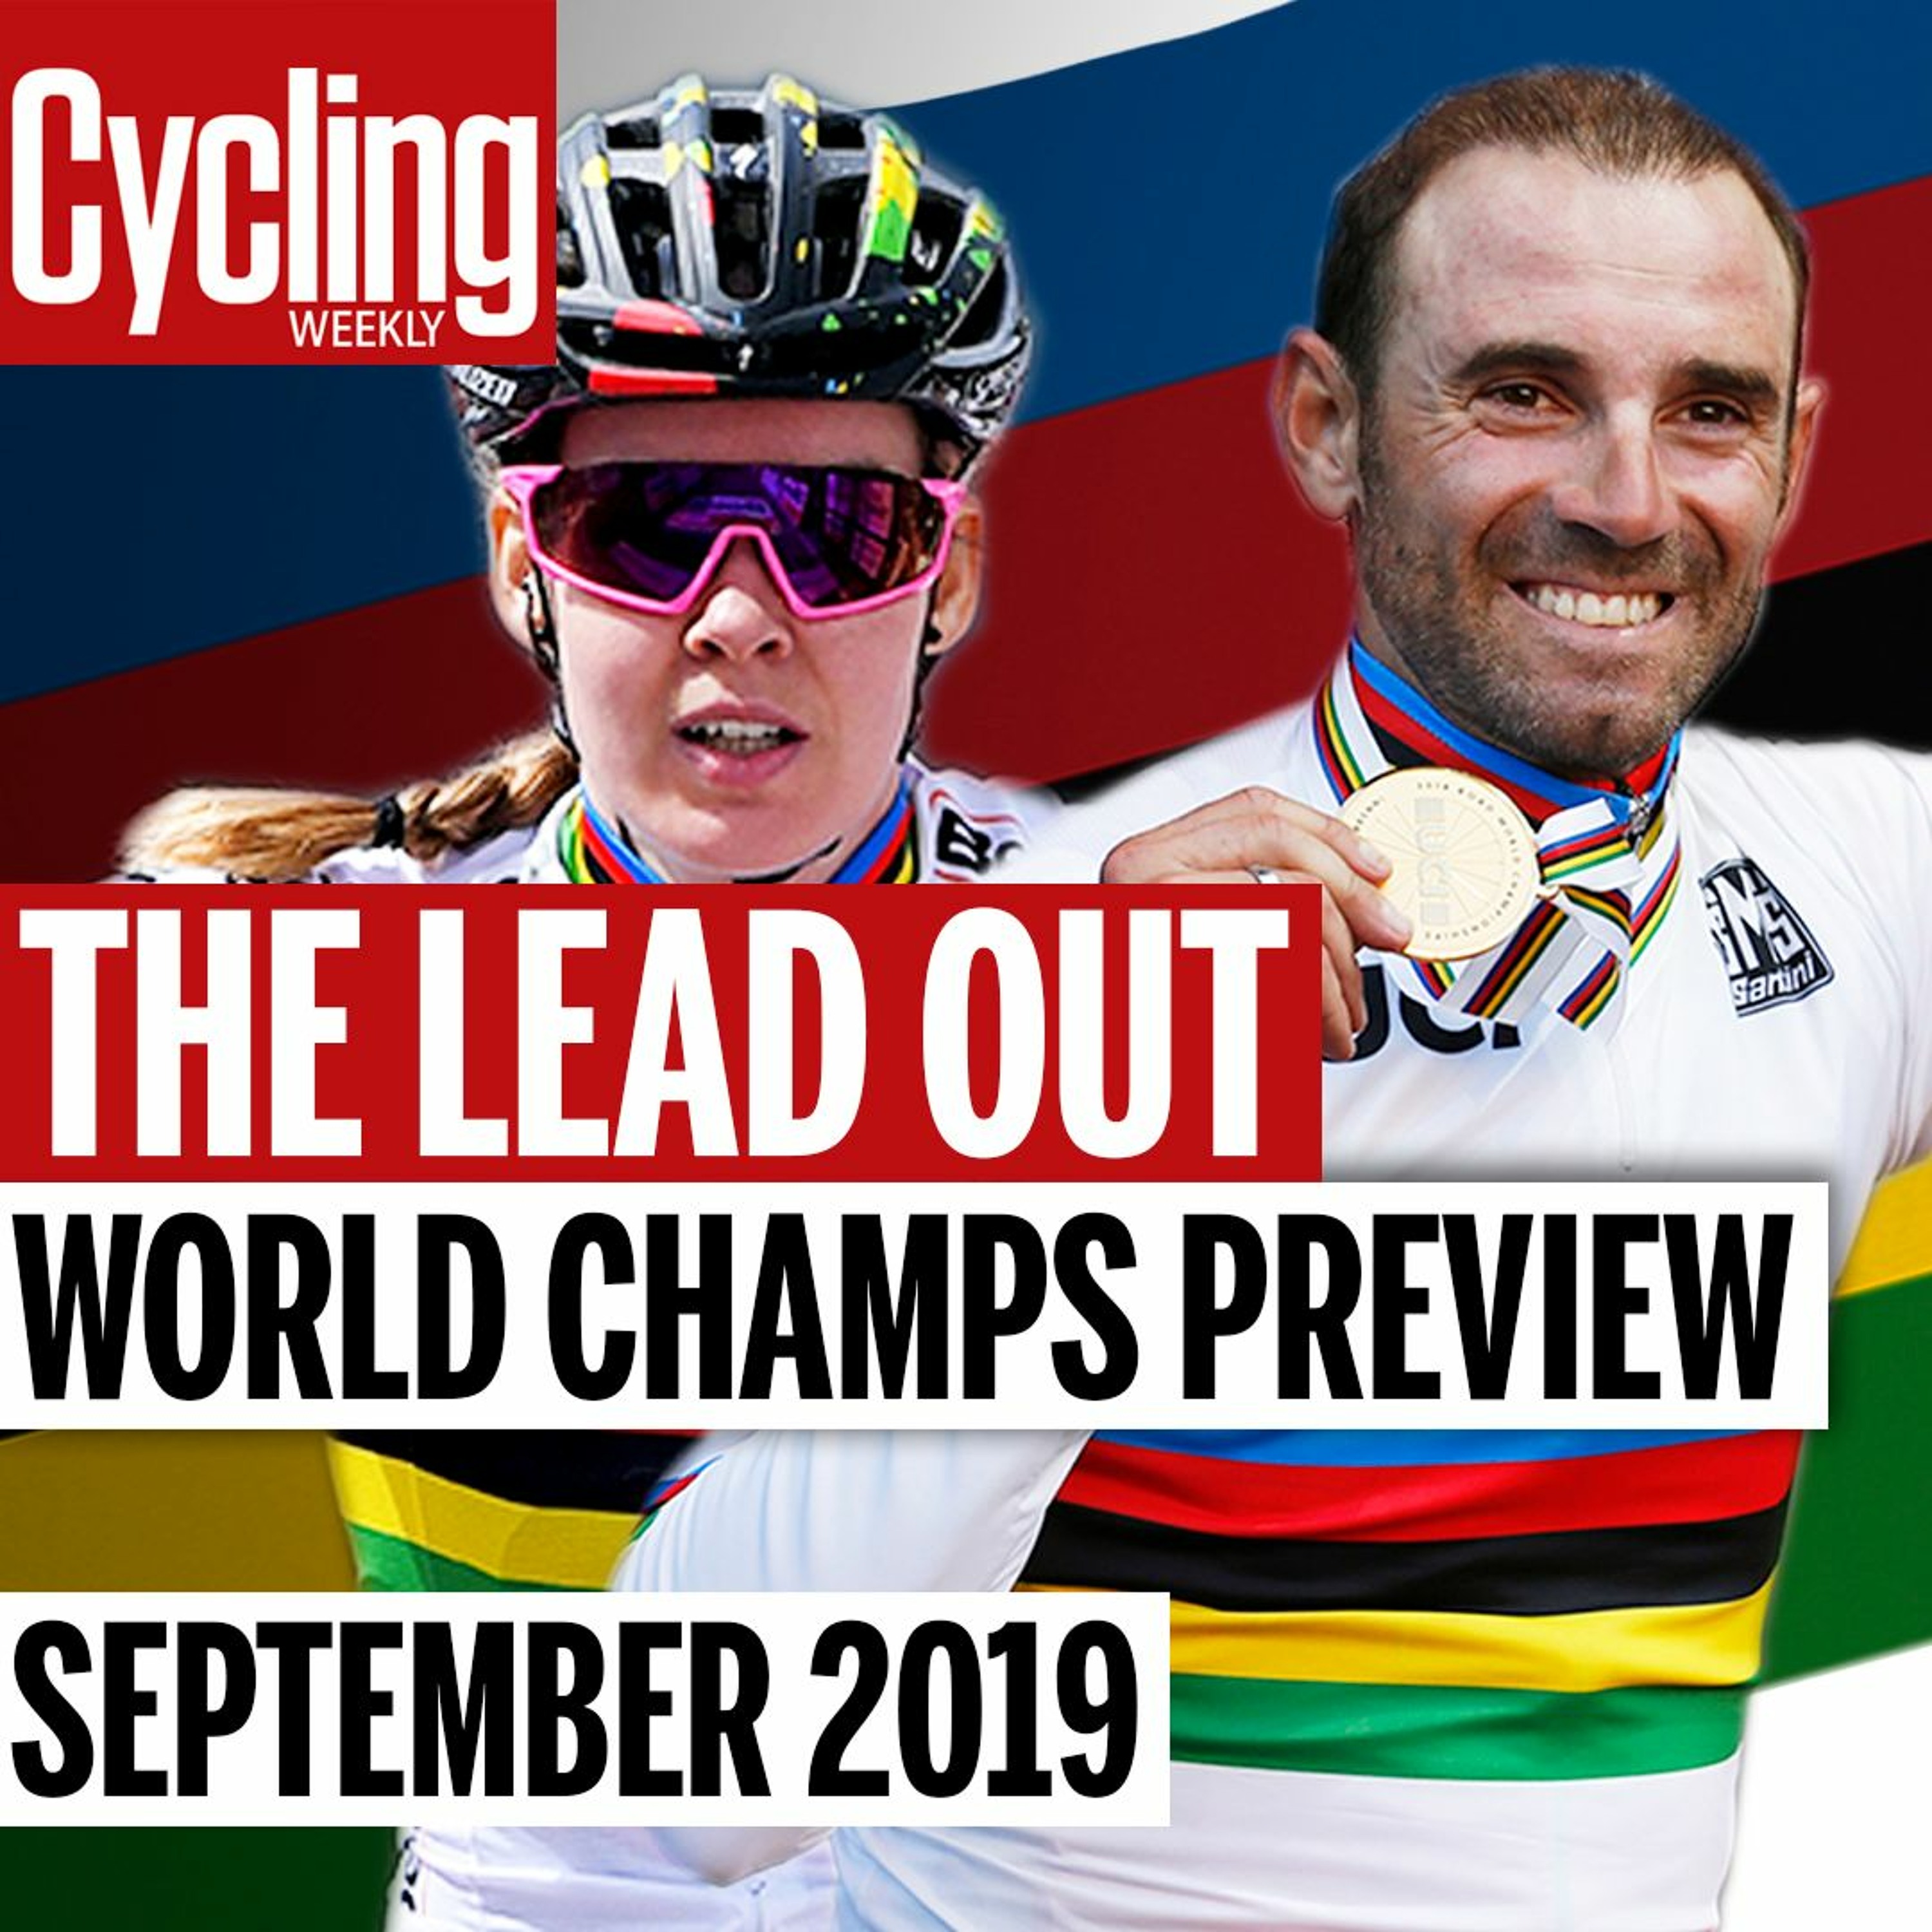 Yorkshire World Championships preview and Vuelta recap | The Lead Out | Cycling Weekly